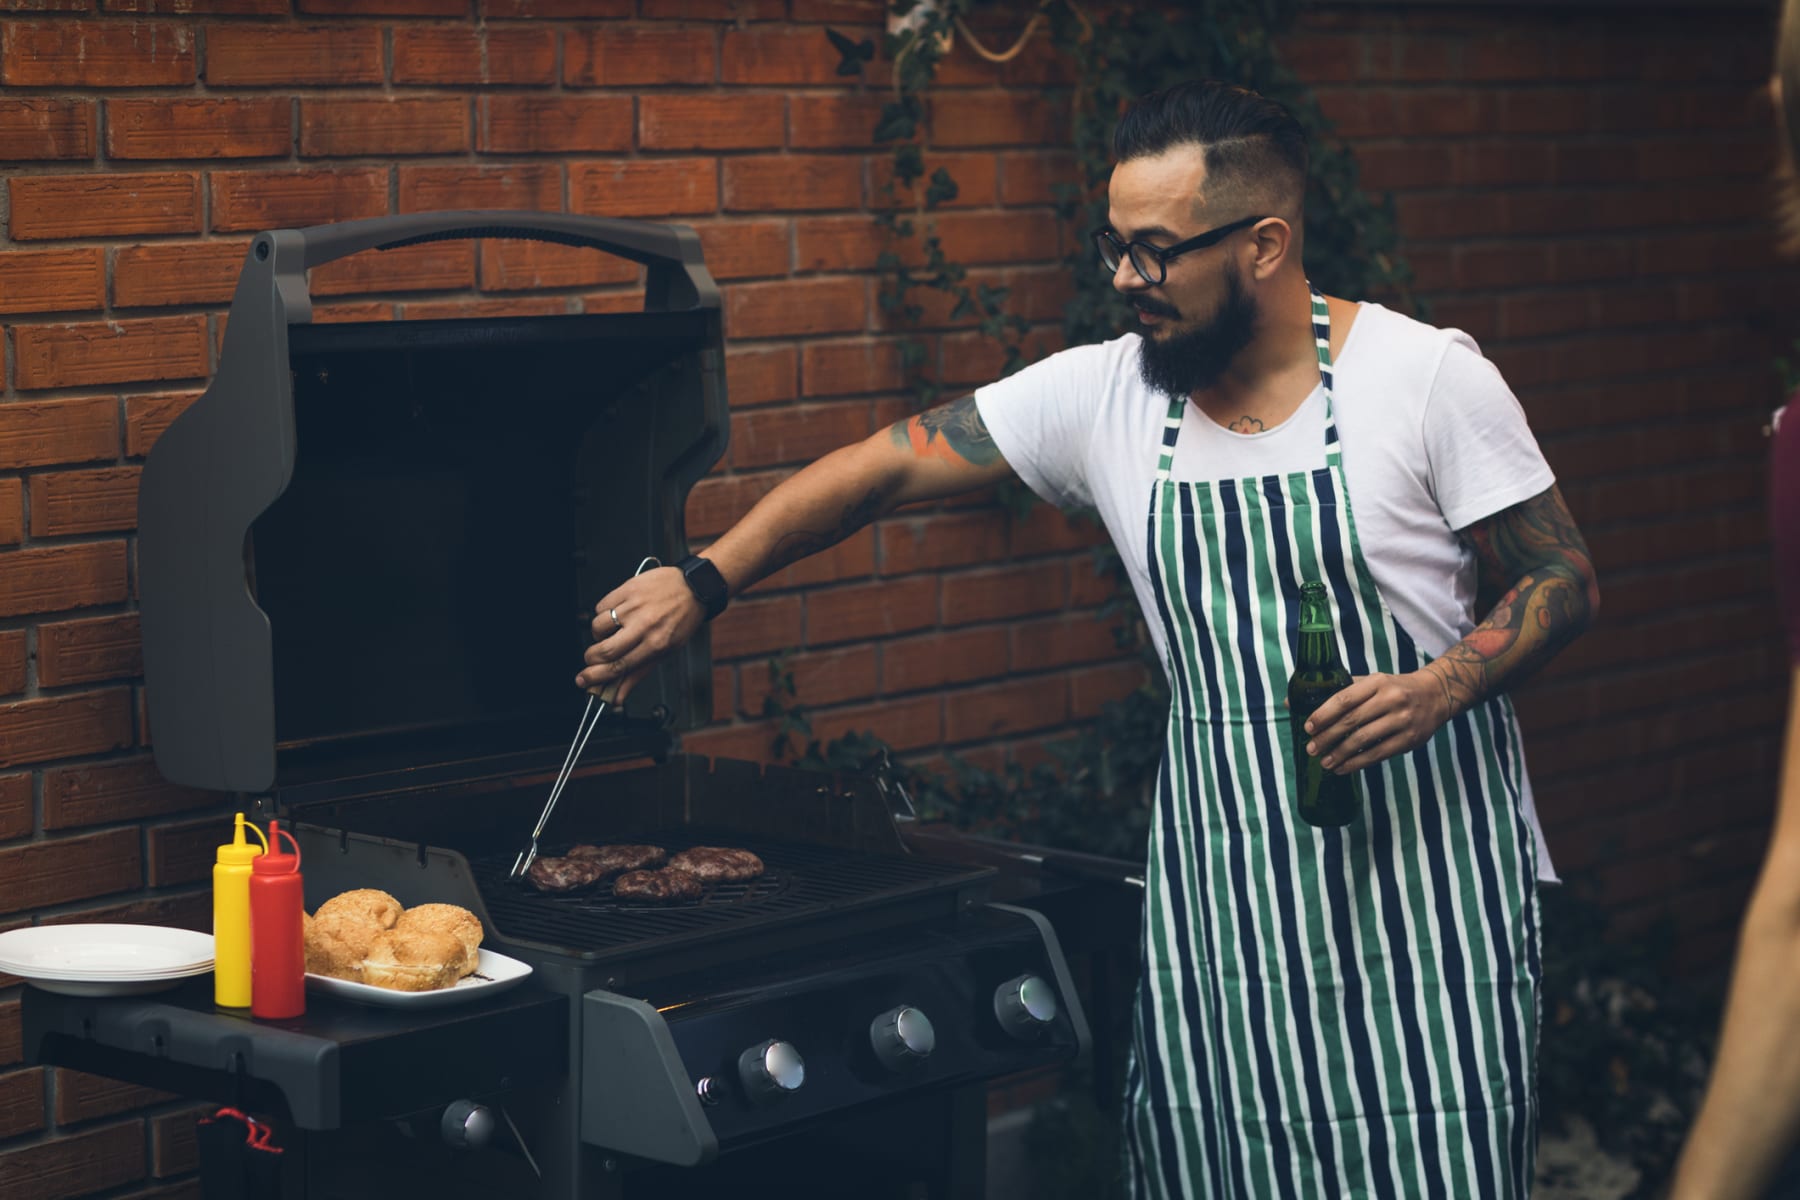 Man cooks burgers on outdoor grill.